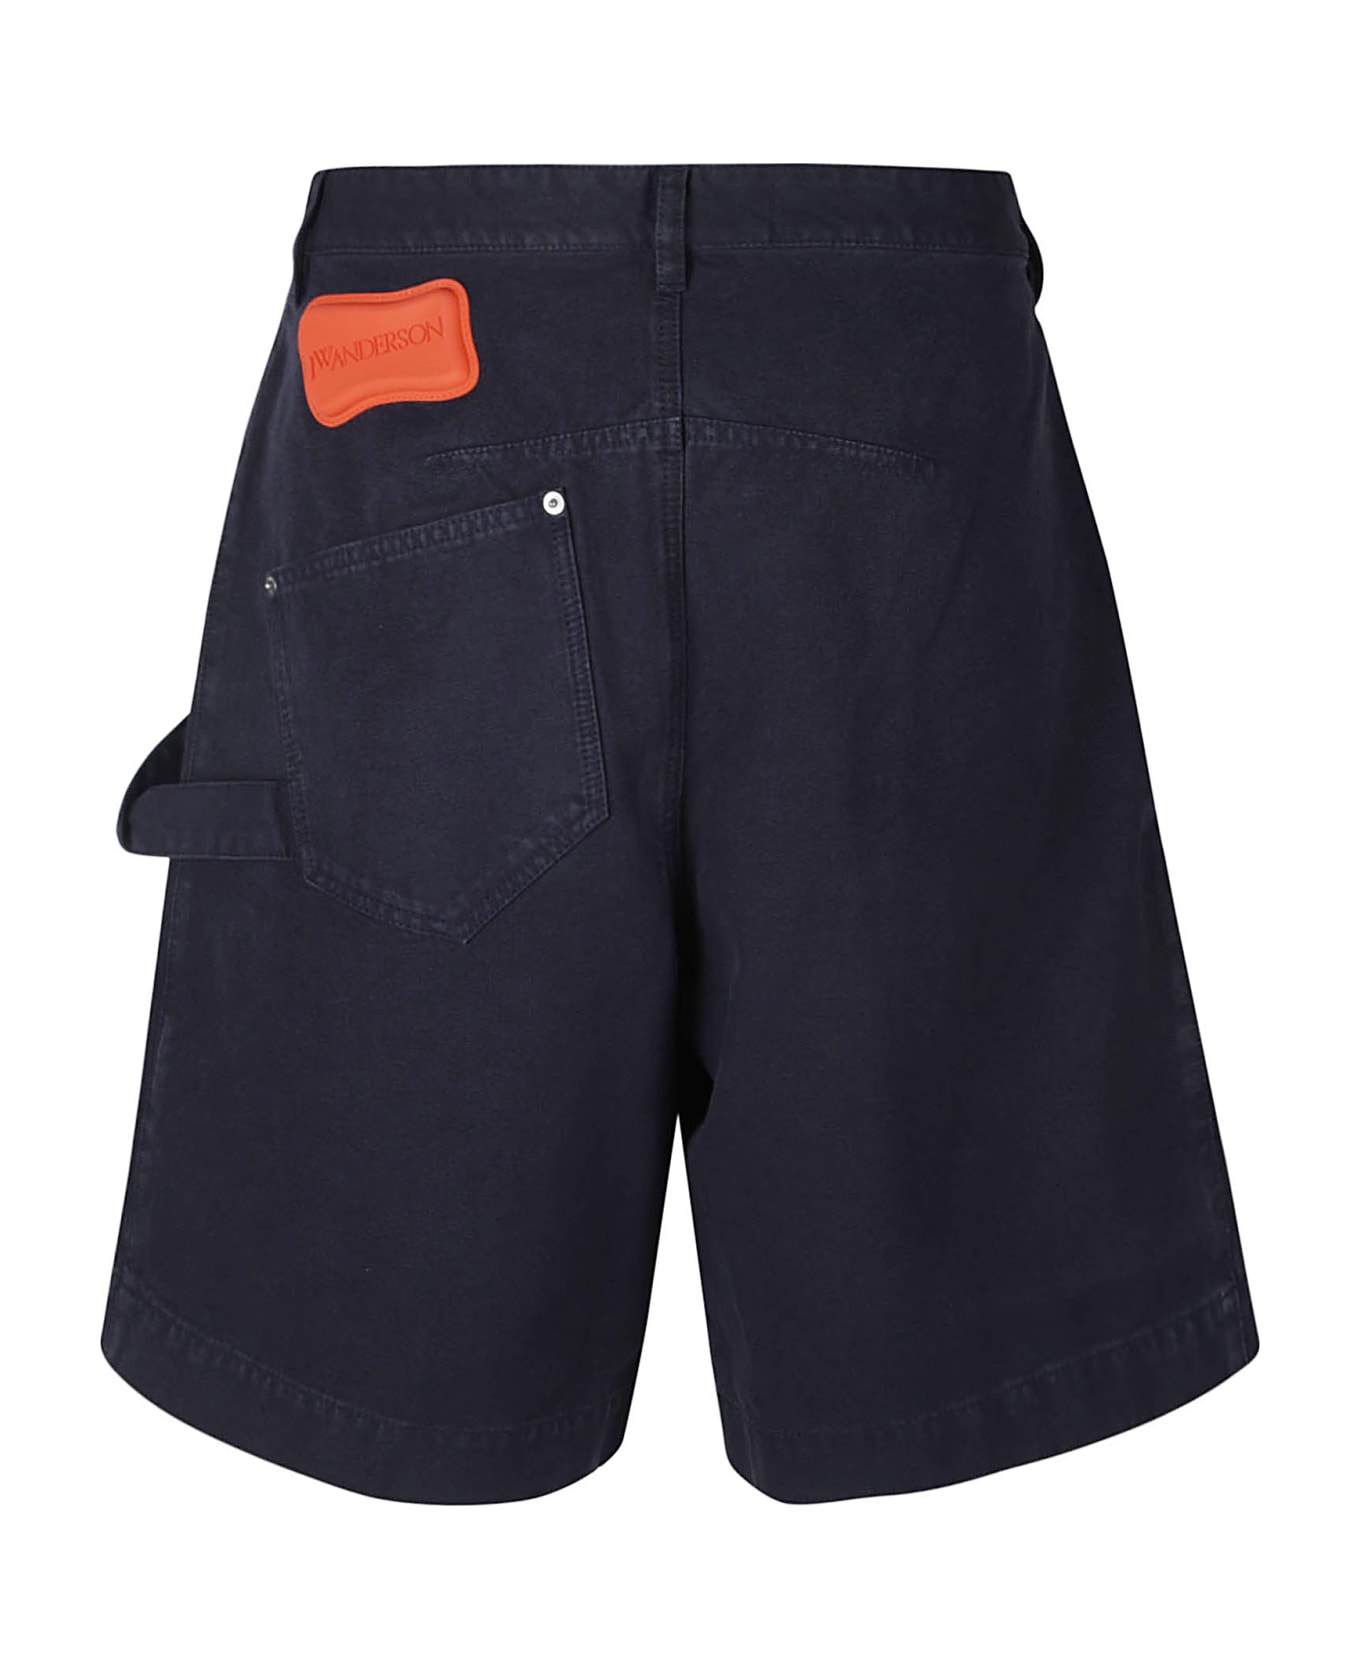 J.W. Anderson Twisted Shorts - Navy ショートパンツ